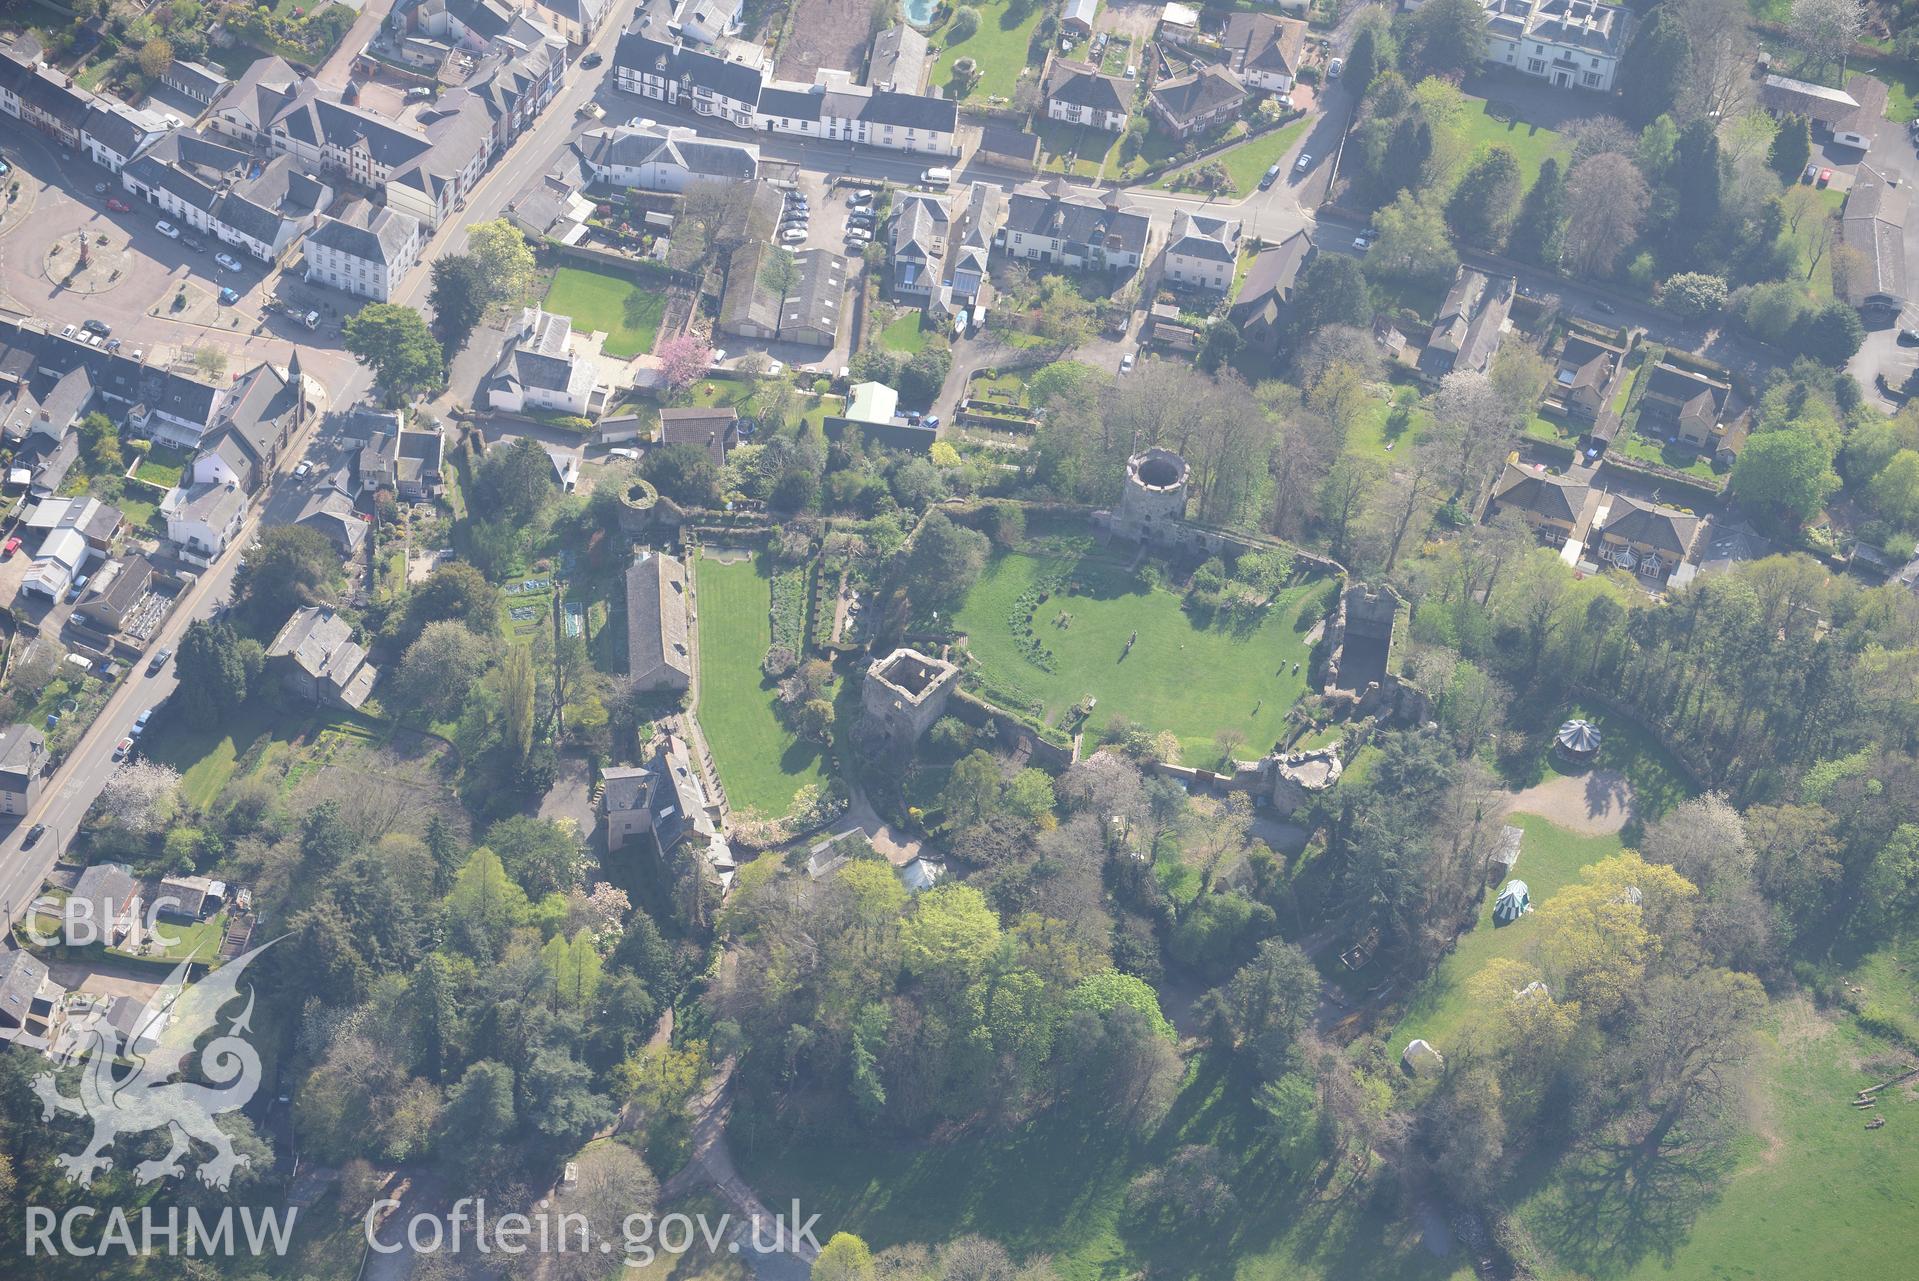 Usk Town including Usk Castle, Barn and Garden, and Plas Newydd Garden. Oblique aerial photograph taken during the Royal Commission's programme of archaeological aerial reconnaissance by Toby Driver on 21st April 2015